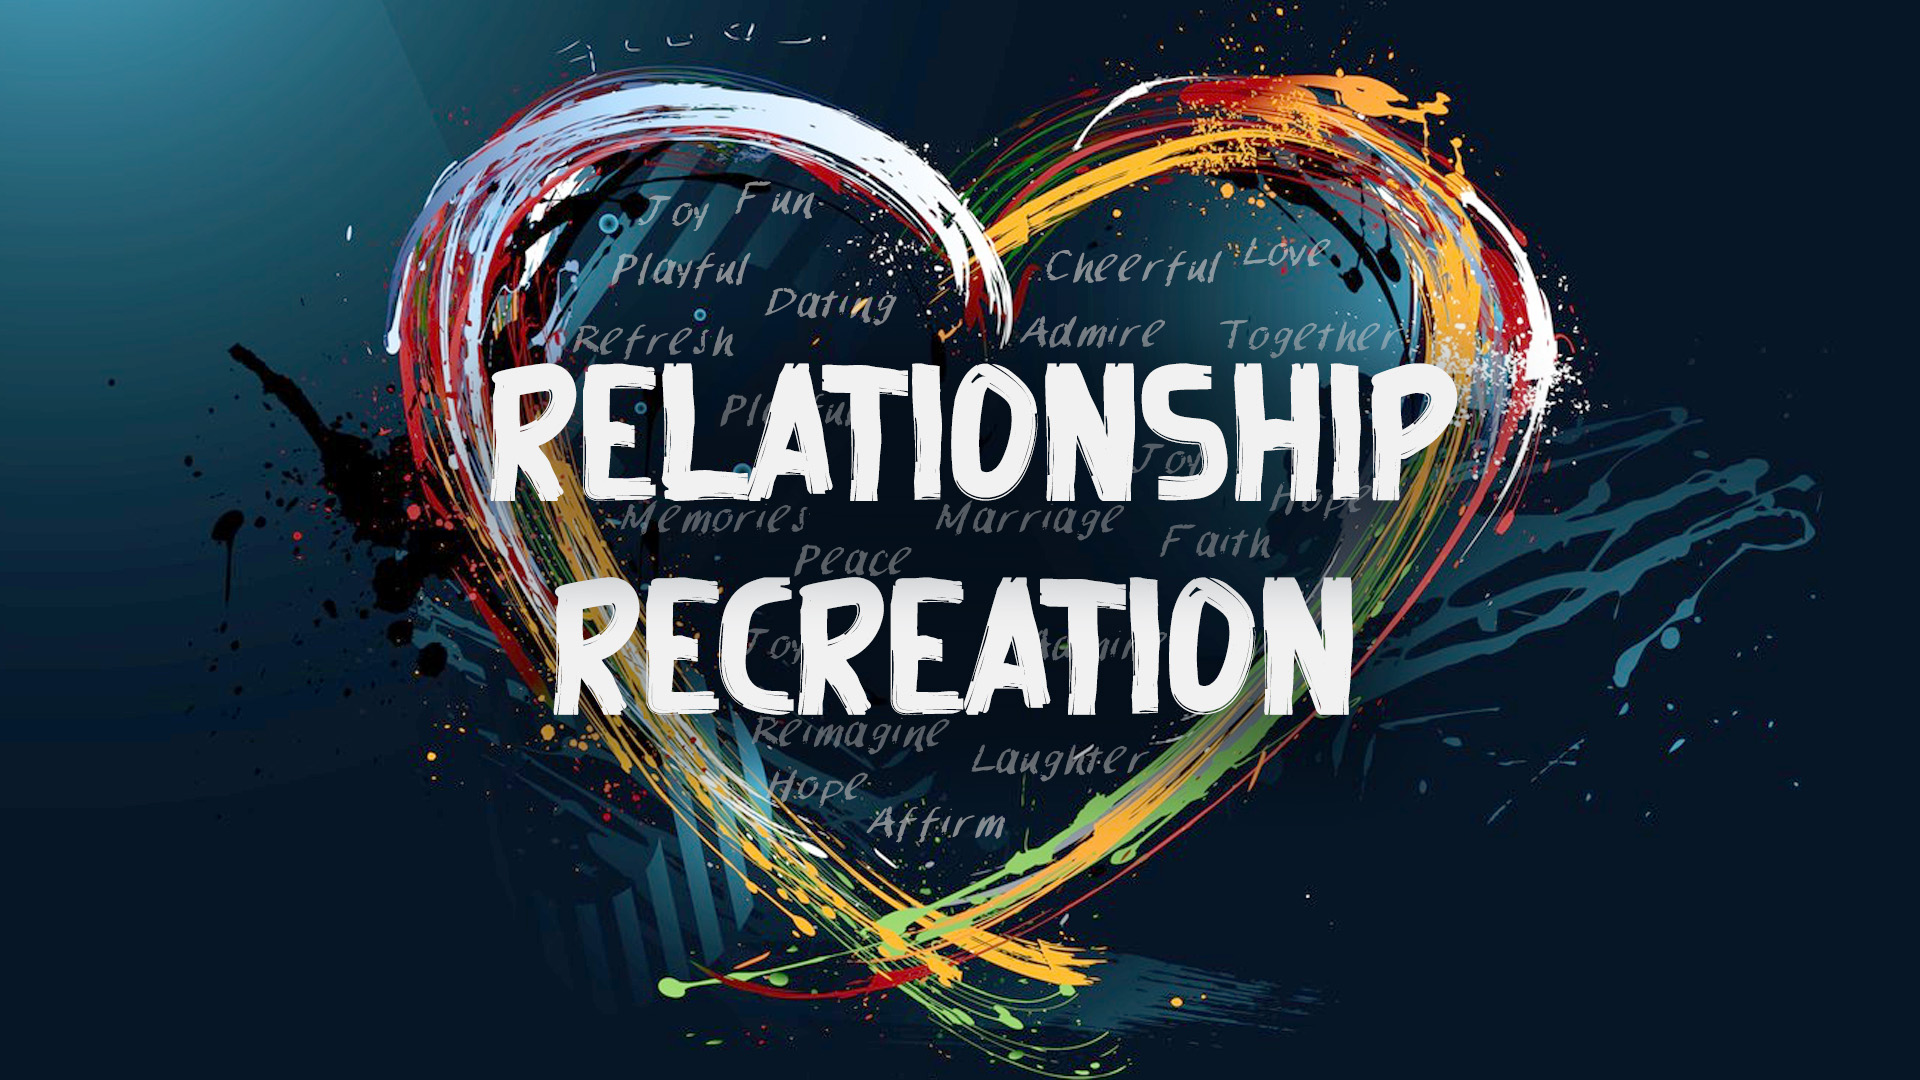 Relationship Re-Creation (For Couples)

Quarterly Meetings
Saturday | 5:00pm - 6:15pm
April 27
Childcare Provided
